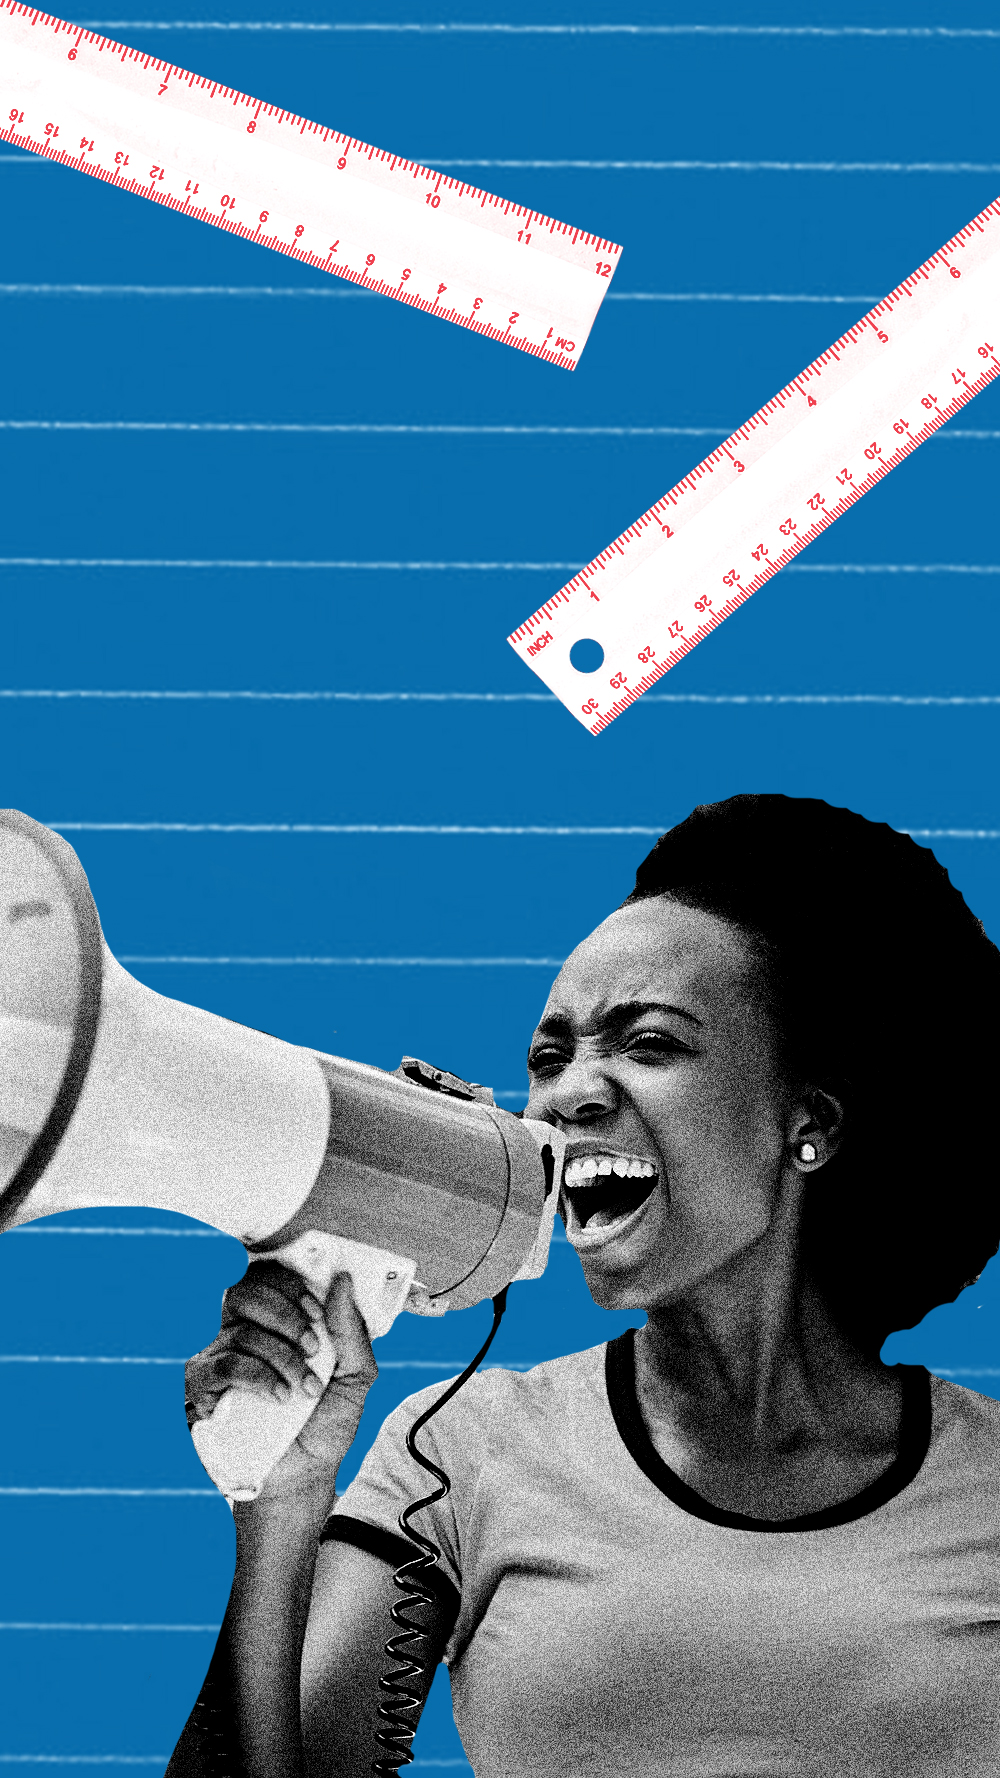 A graphic of a woman holding a megaphone.